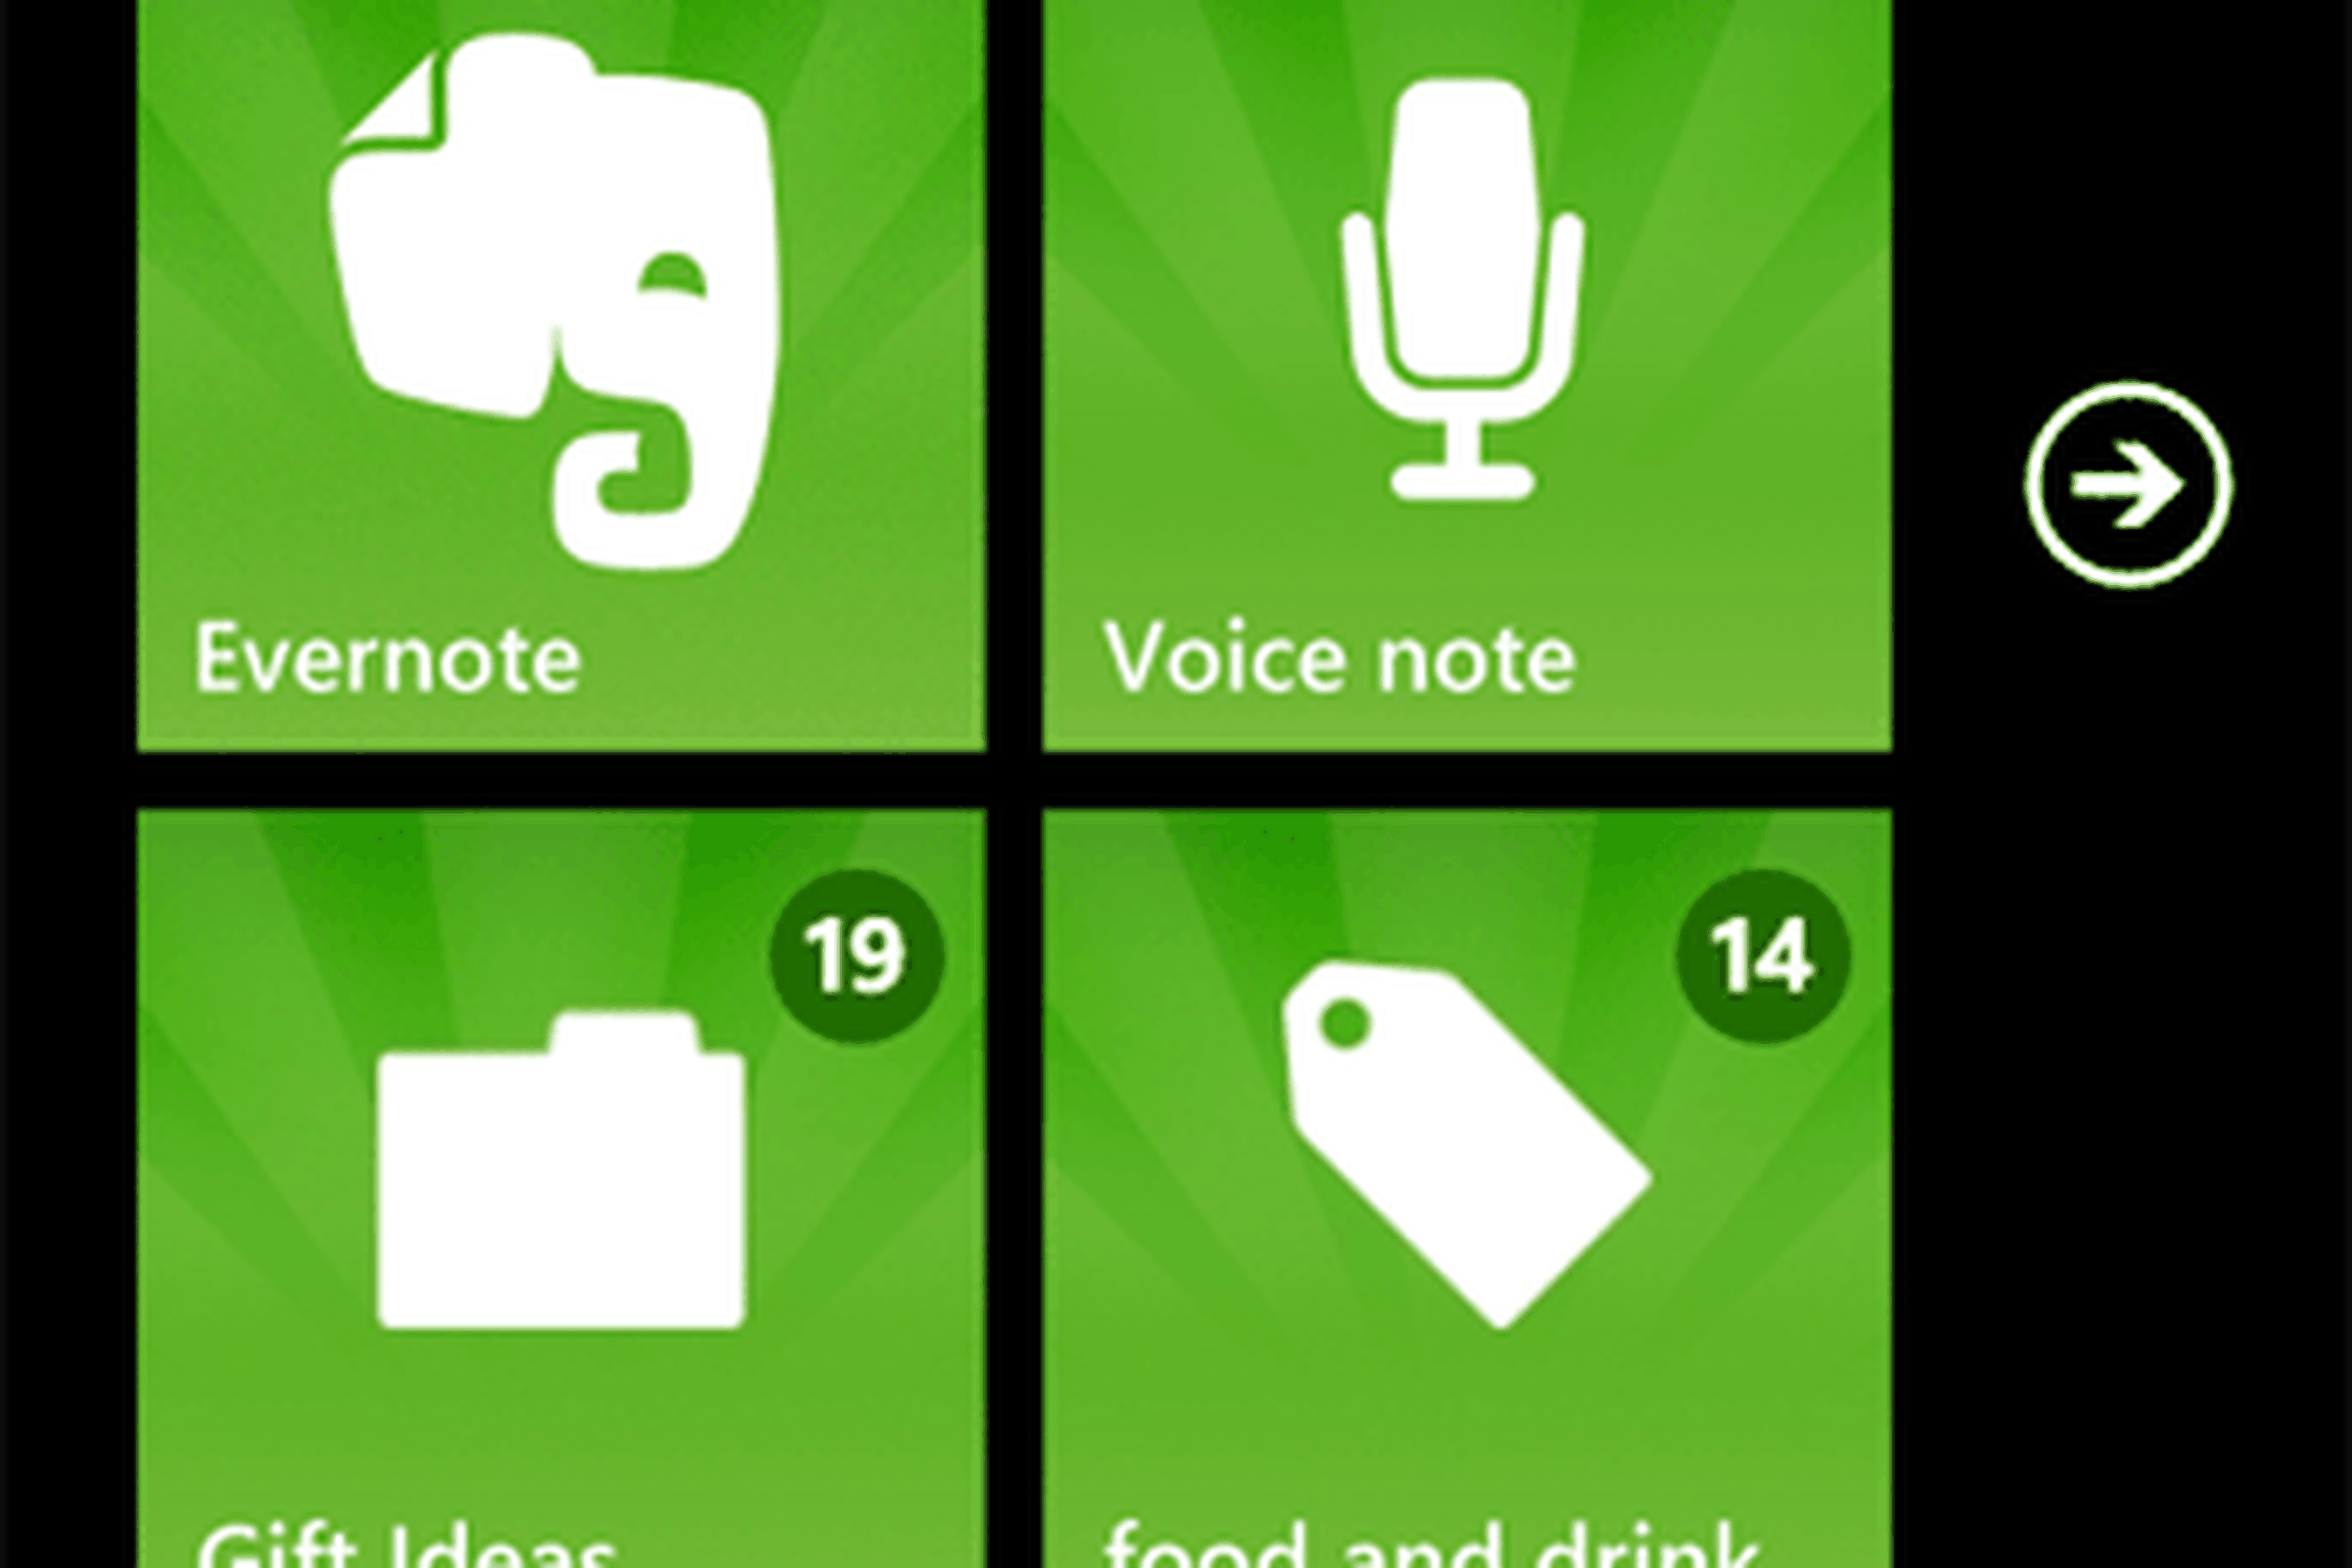 Evernote WP7 Tiles